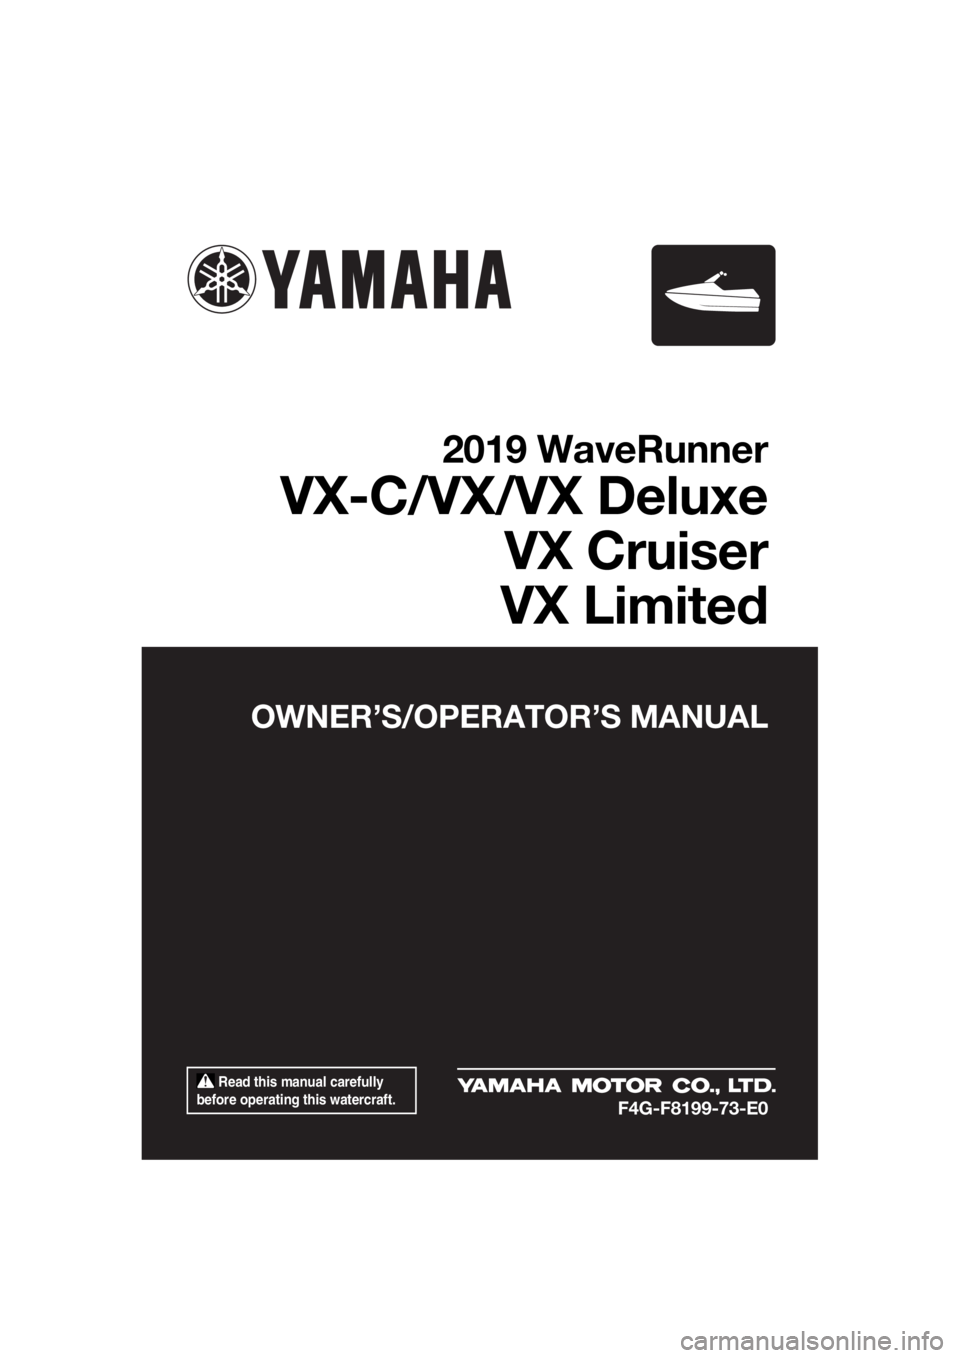 YAMAHA VX 2019  Owners Manual  Read this manual carefully 
before operating this watercraft.
OWNER’S/OPERATOR’S MANUAL
2019 WaveRunner
VX-C/VX/VX Deluxe
VX Cruiser
VX Limited
F4G-F8199-73-E0
UF4G73E0.book  Page 1  Friday, May 